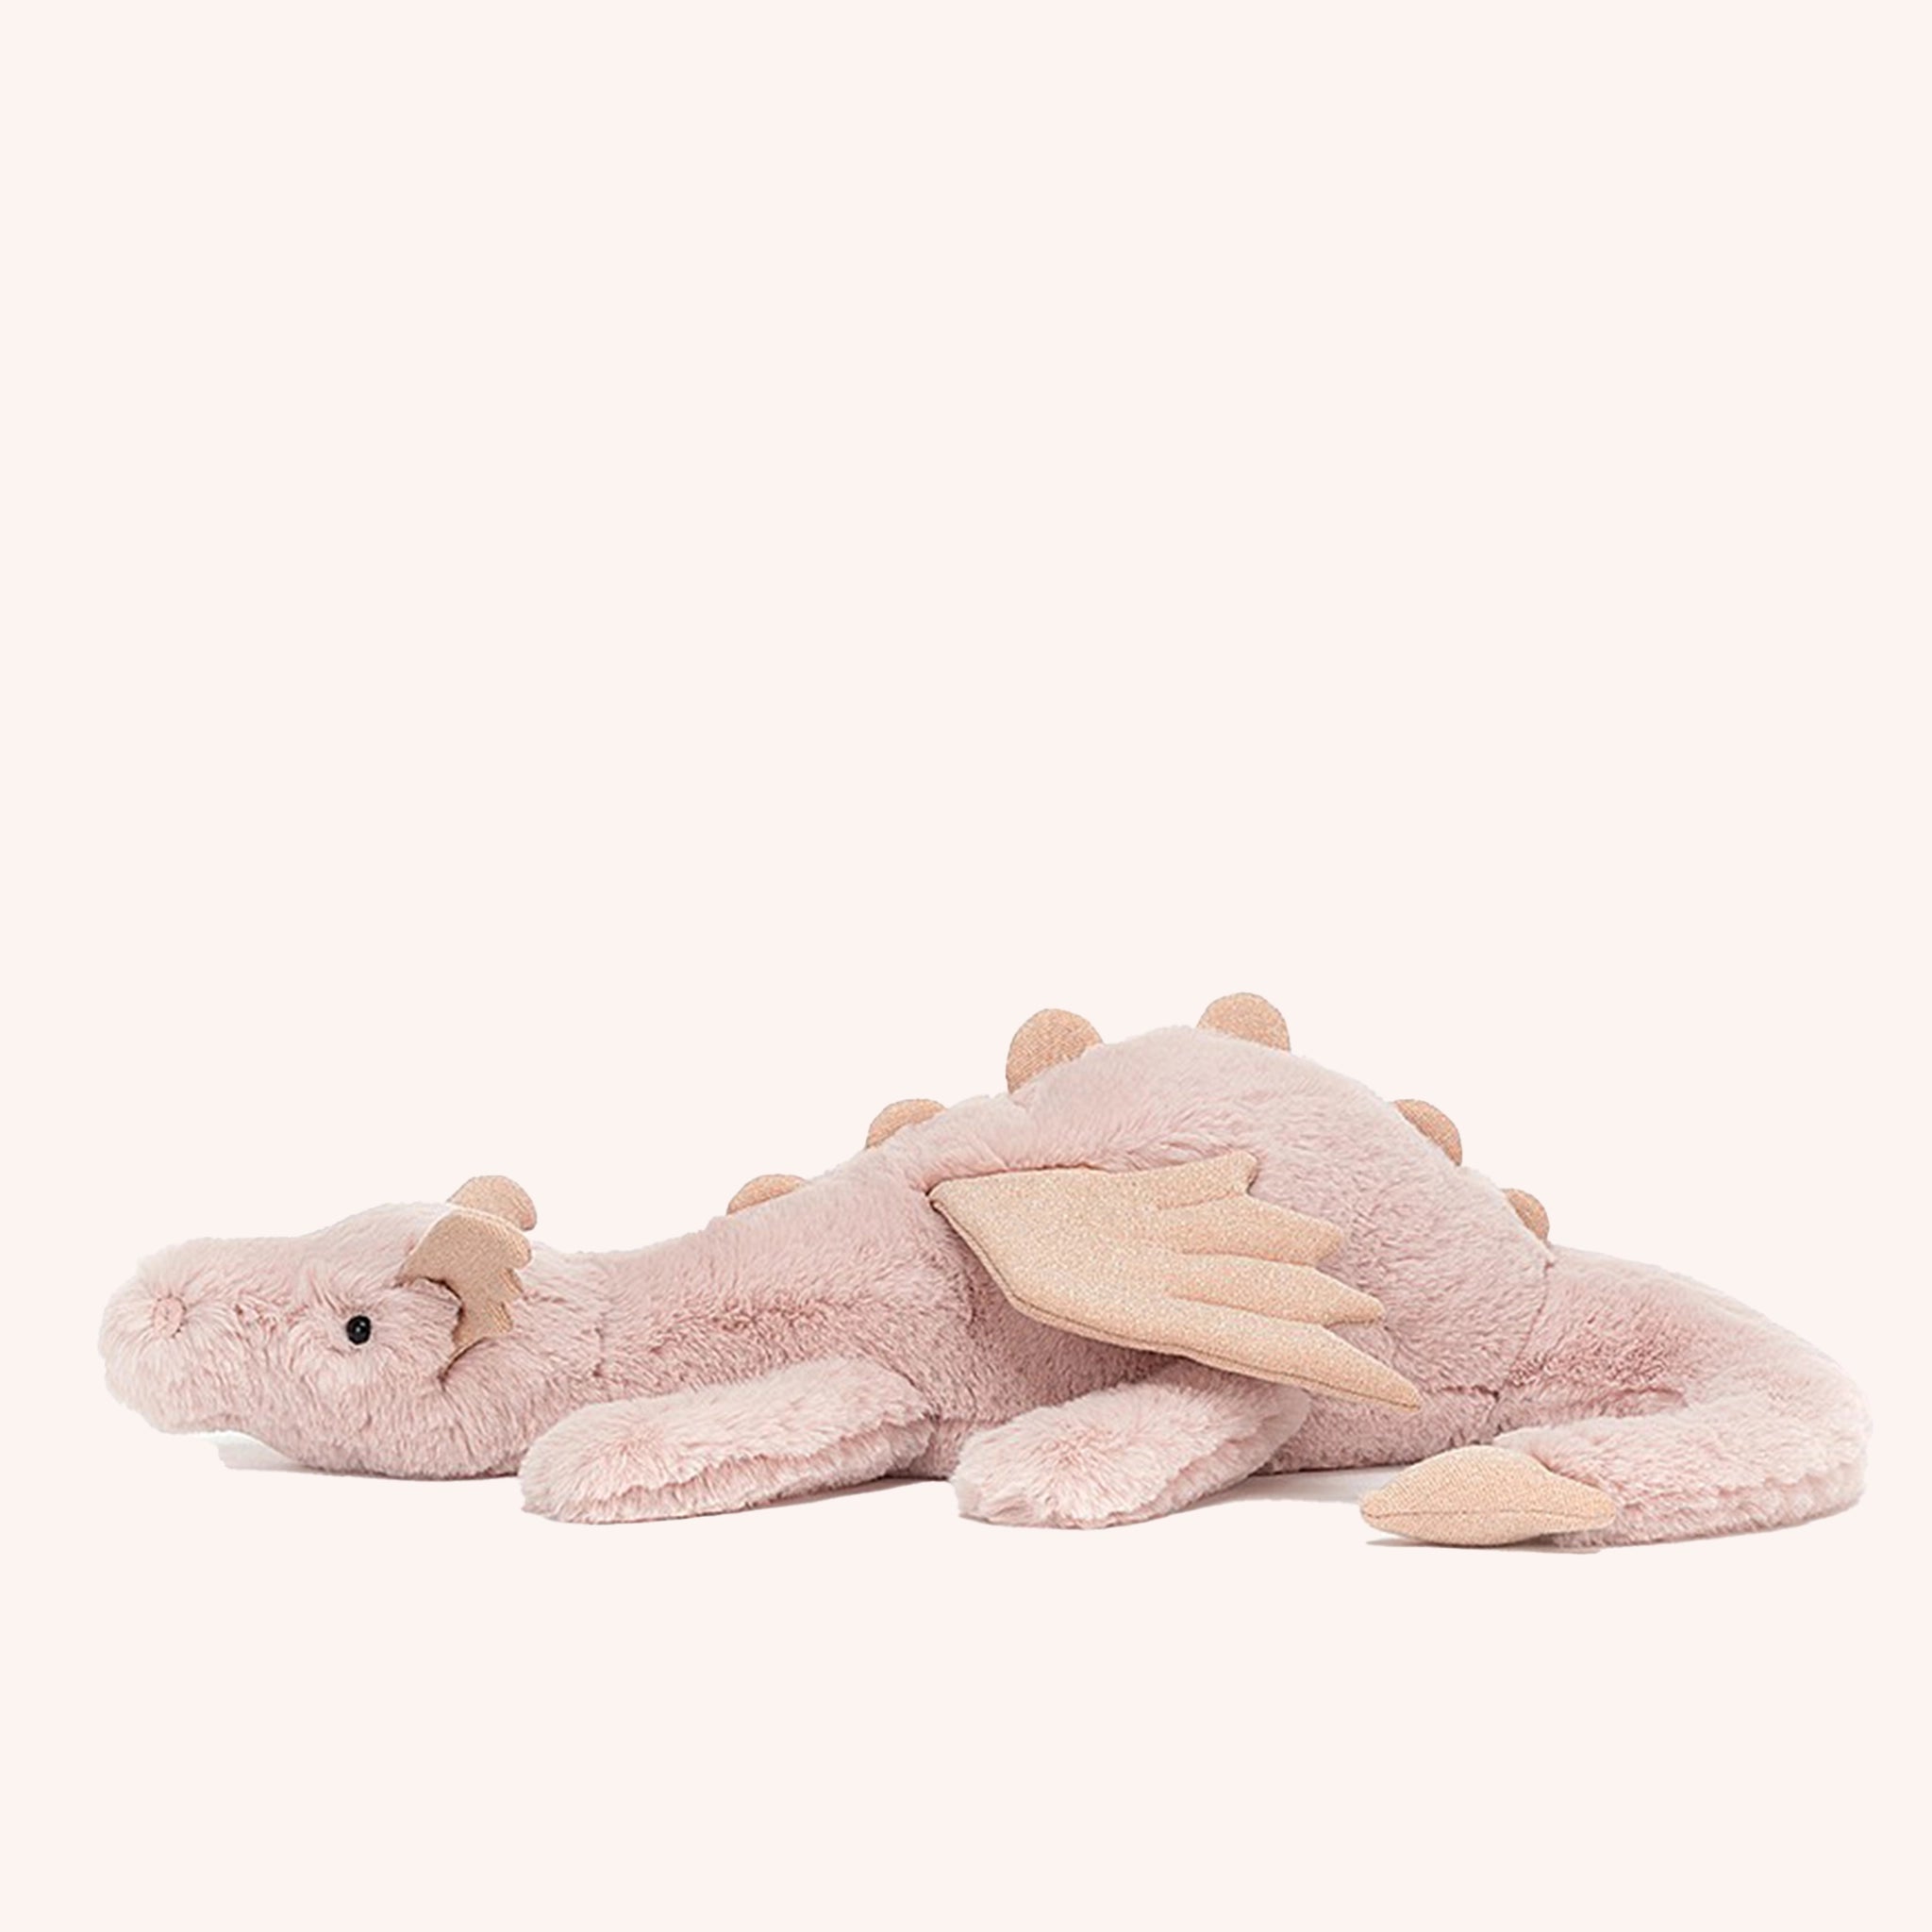 On a white background is a light pink dragon stuffed animal with wings, a sweet face and a long tail.